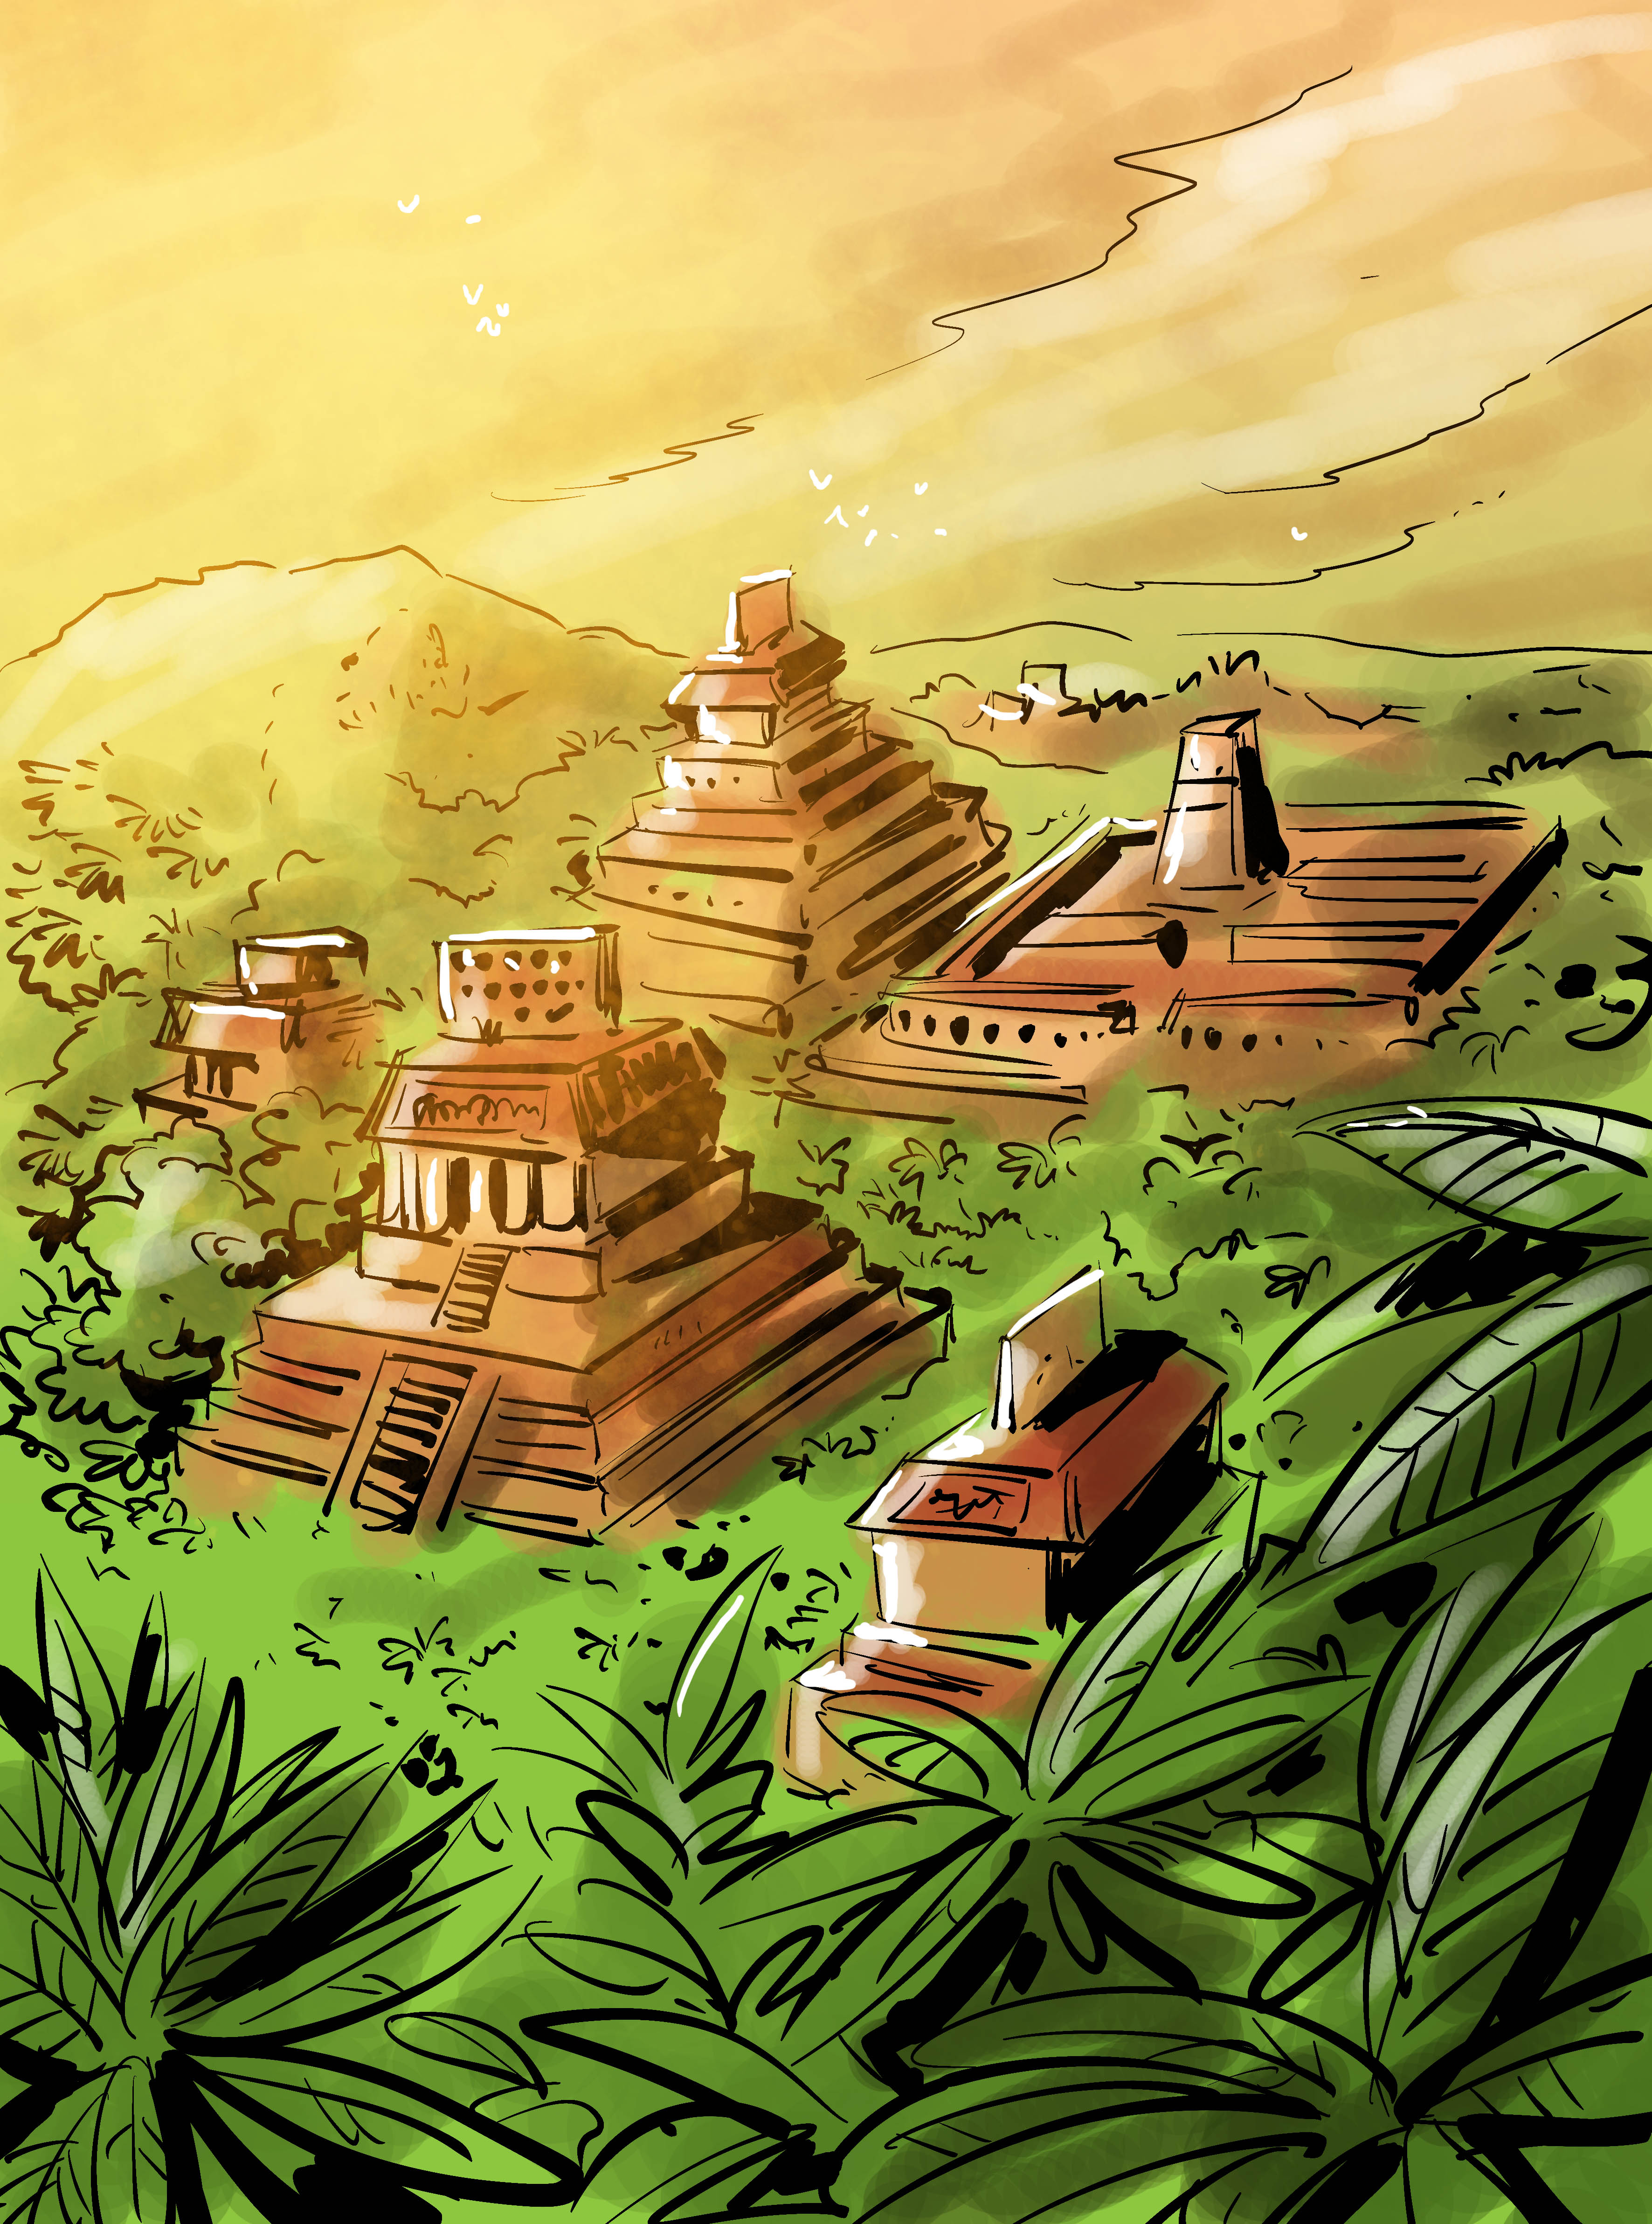 An illustration of historical buildings surrounded by jungle under shining sun